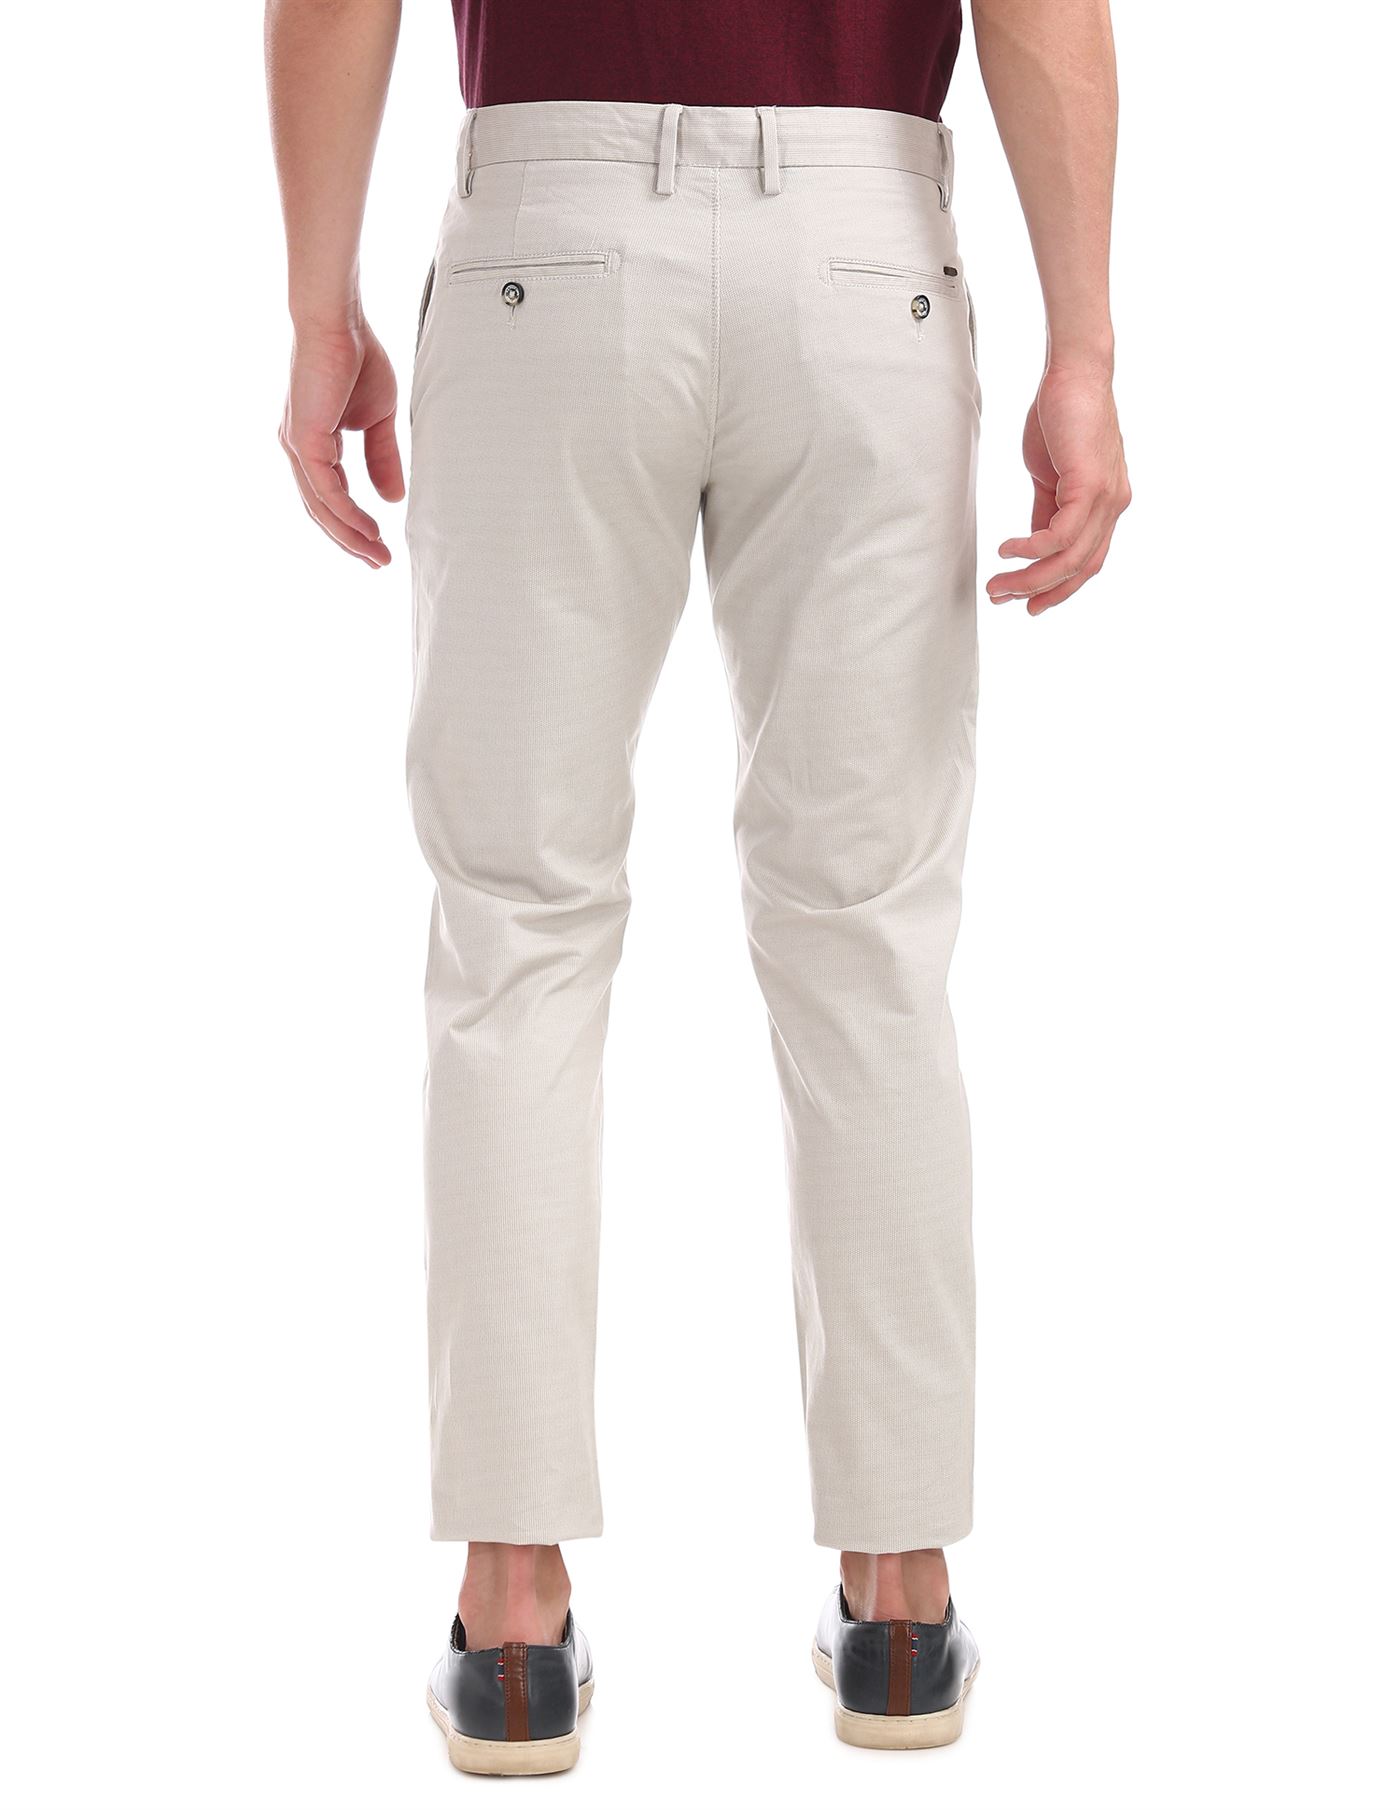 Buy British Terminal Off White Stretchable Relaxed Slim fit Casual Cotton  Stylish Trousers Chinos Pant for Men at Amazonin